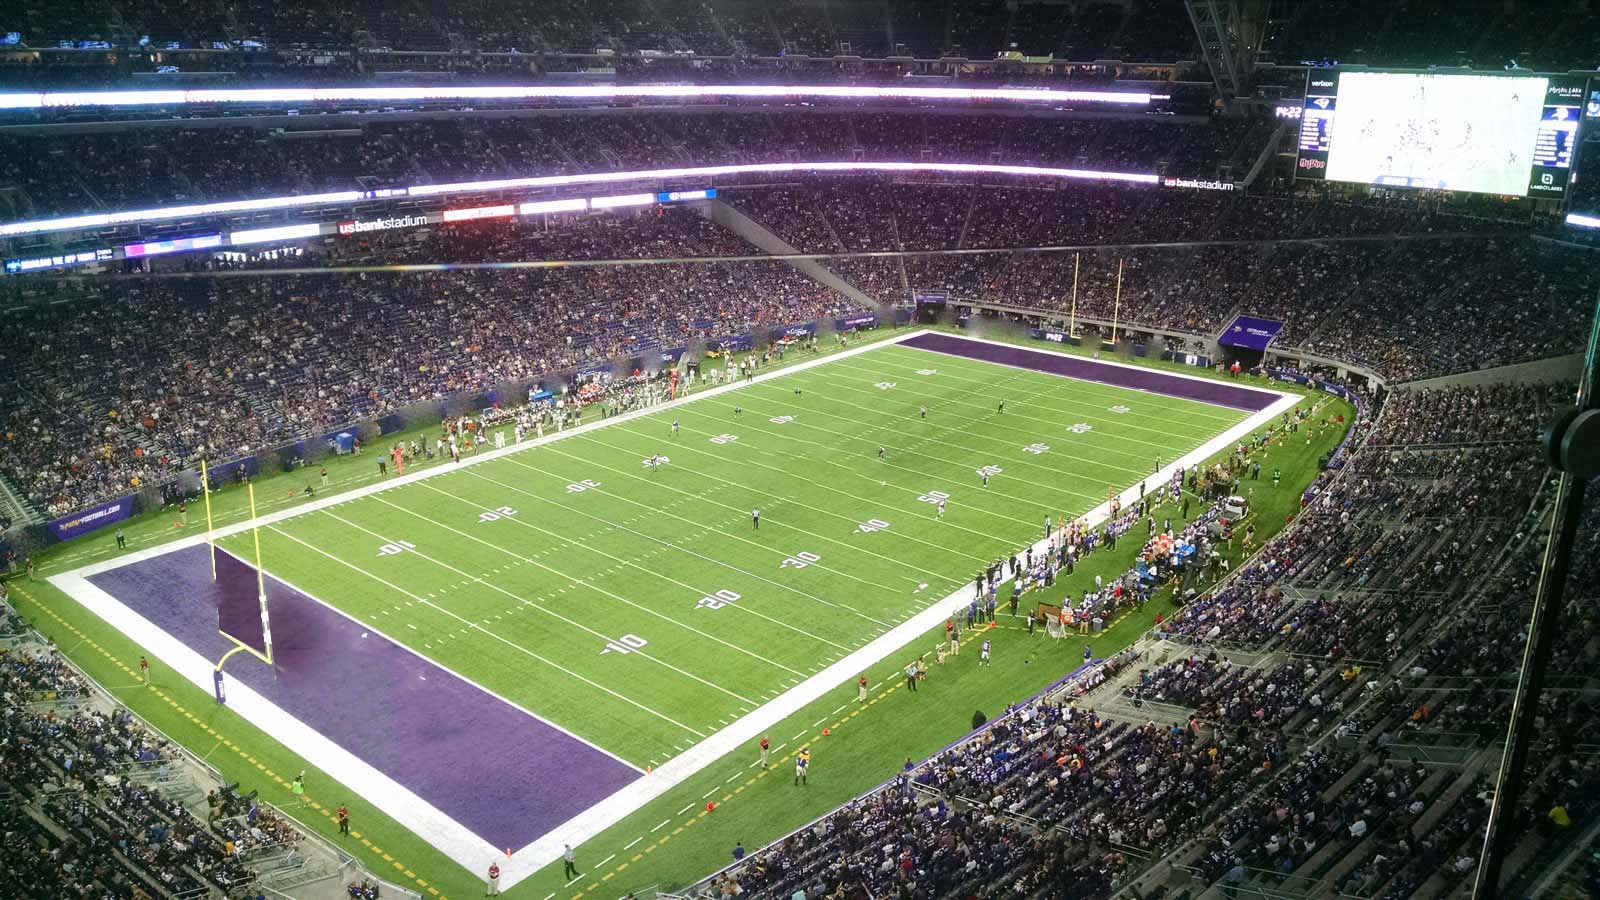 section 349, row 1 seat view  for football - u.s. bank stadium